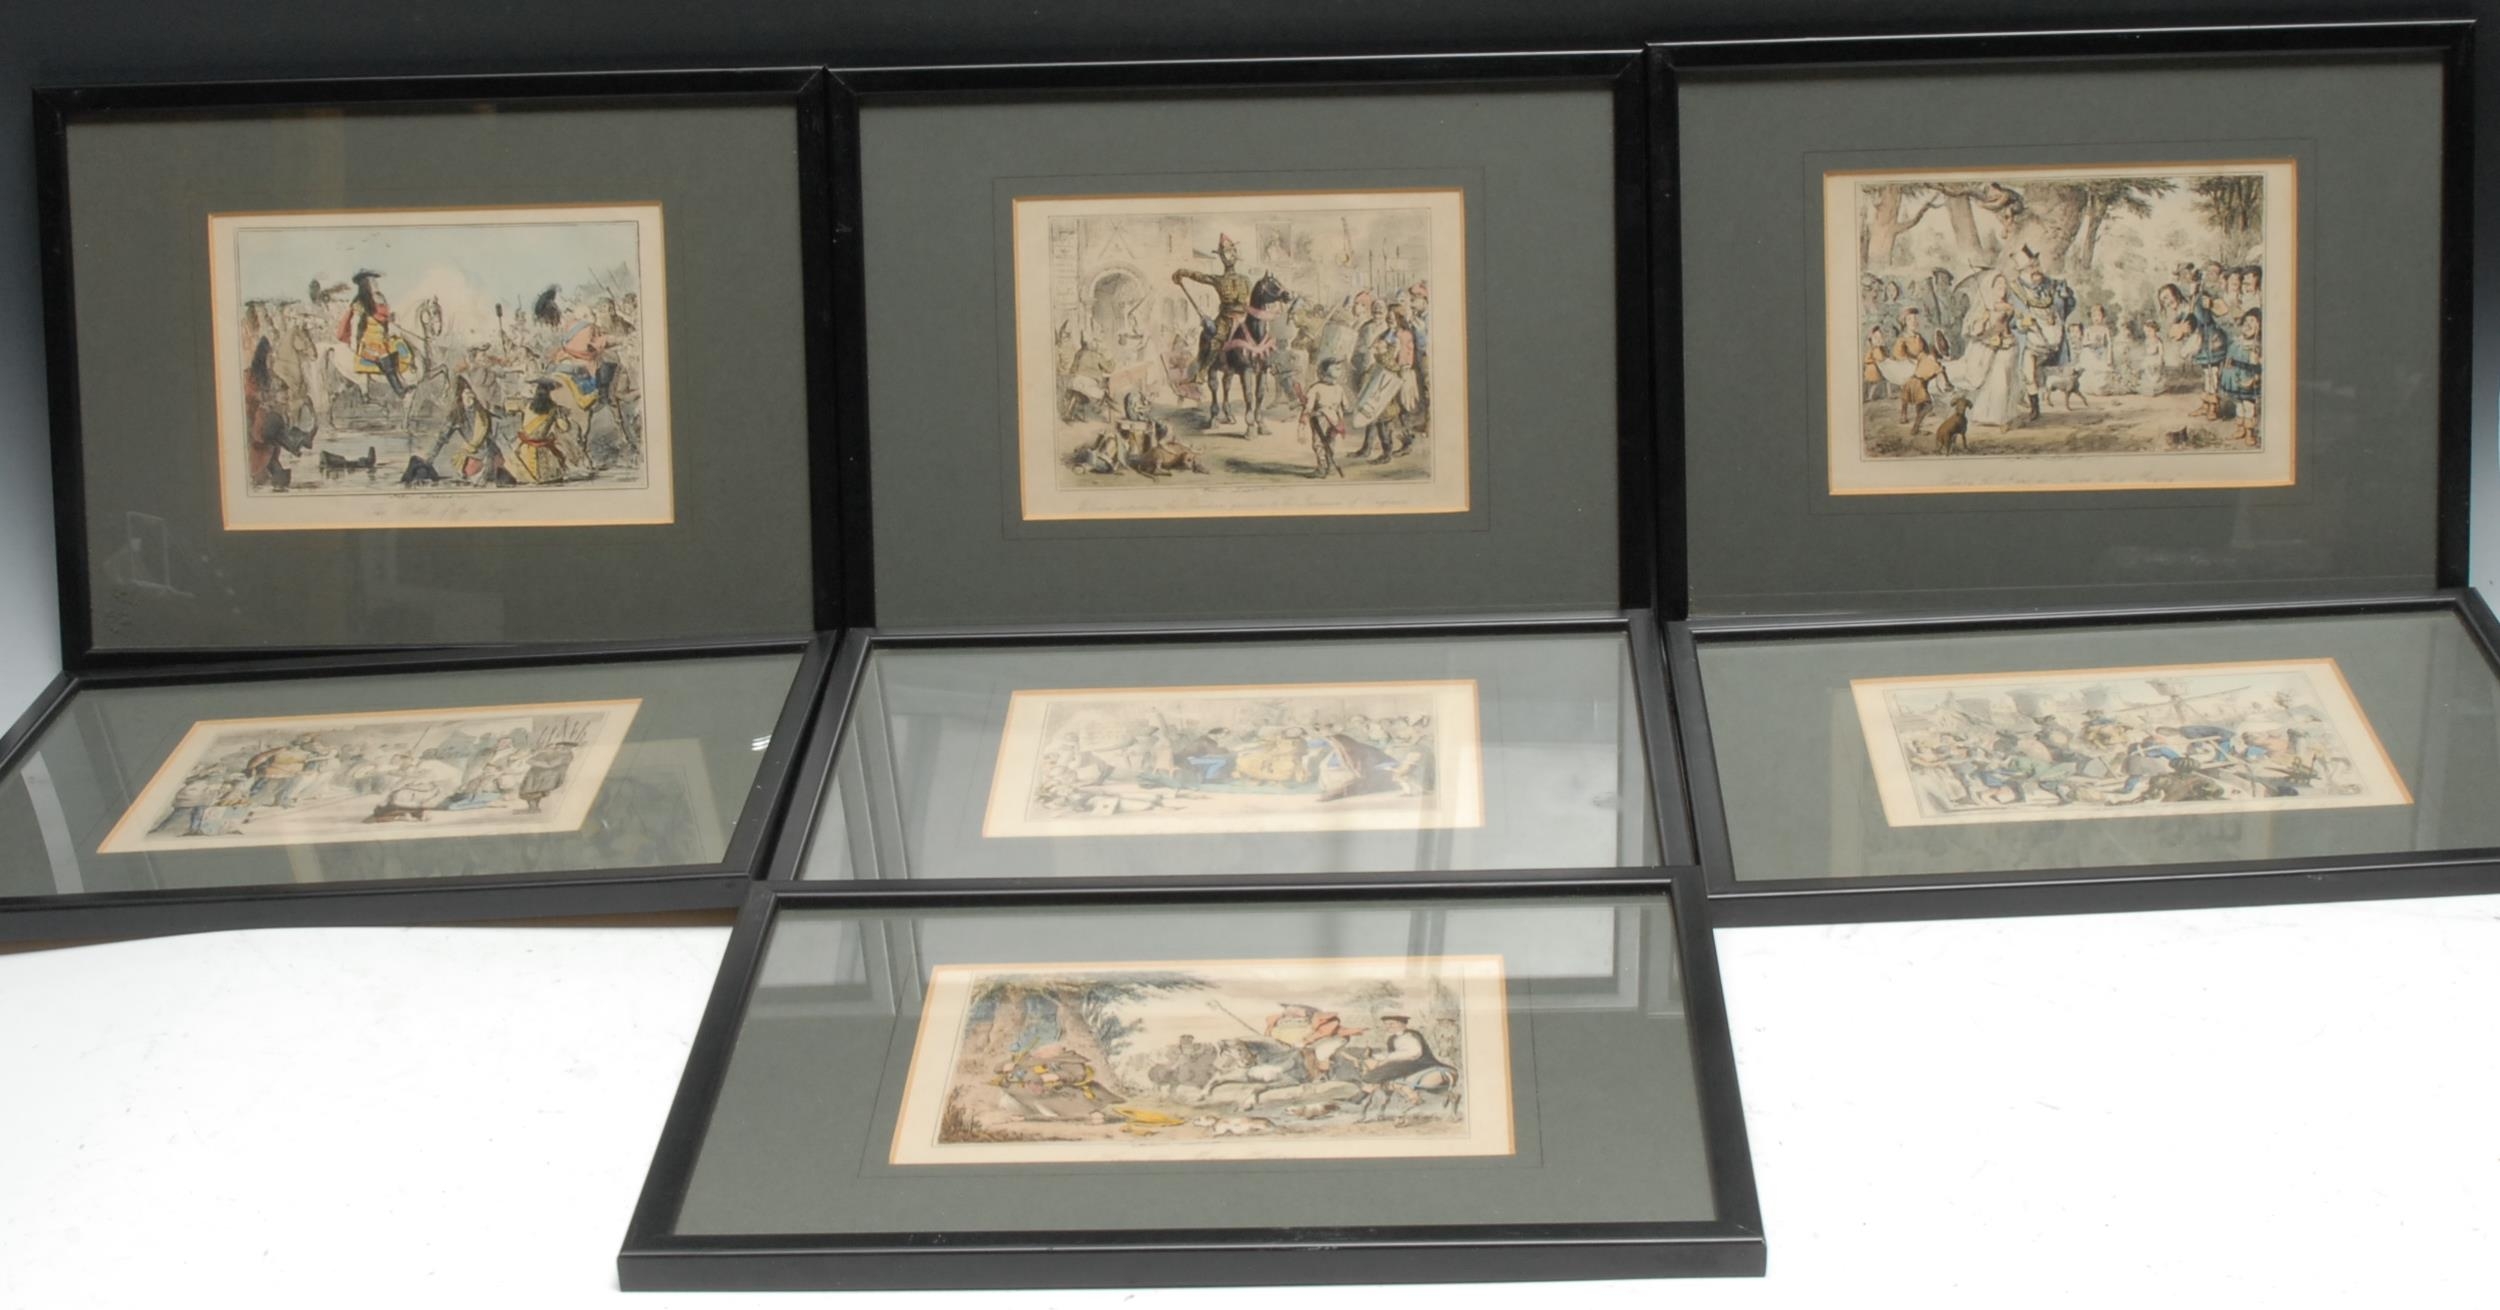 John Leech (1817 - 1864), after, set of seven caricature and comical prints, Embarkation of King